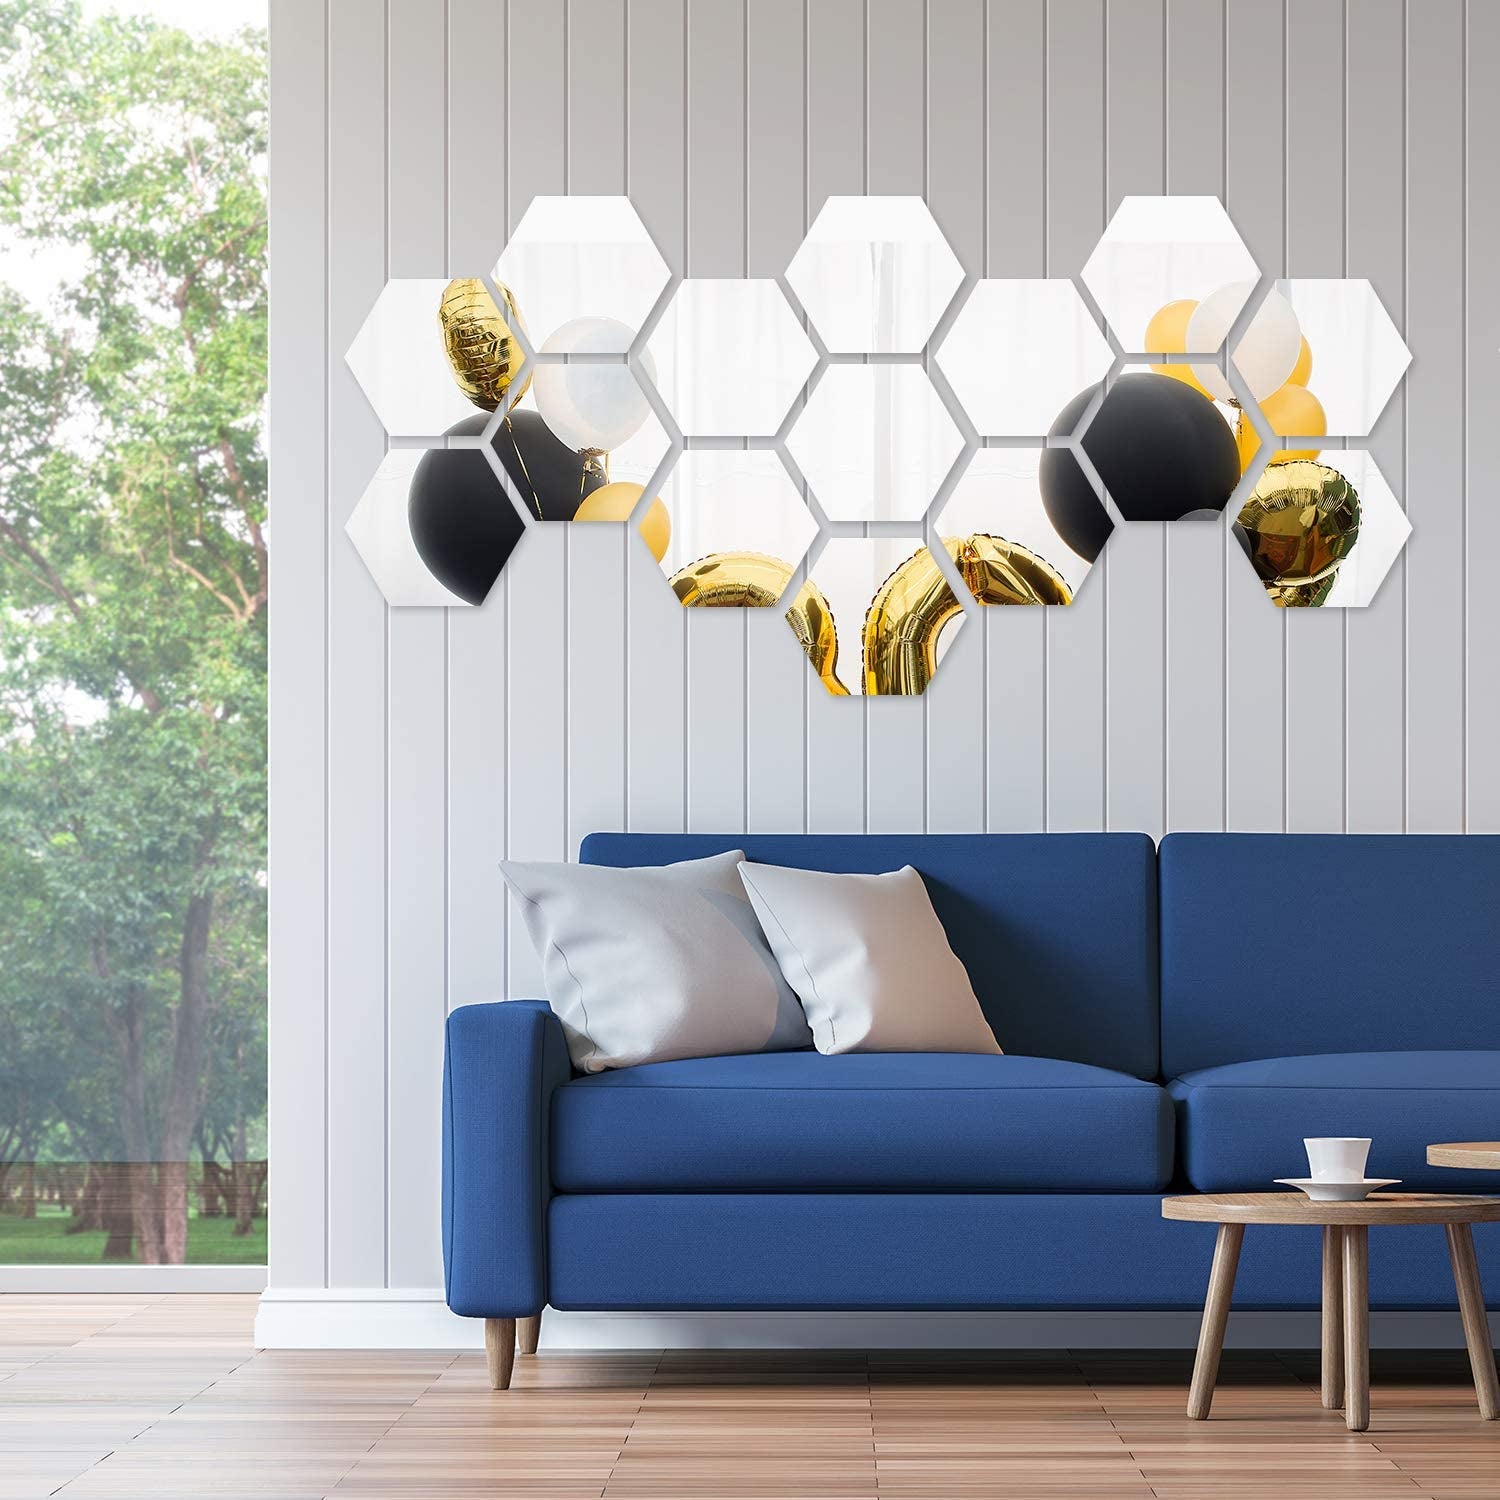 15 Pieces Removable Acrylic Mirror Setting Wall Sticker Decal for Home Living Room Bedroom Decor (Hexagon, 15 Pieces)